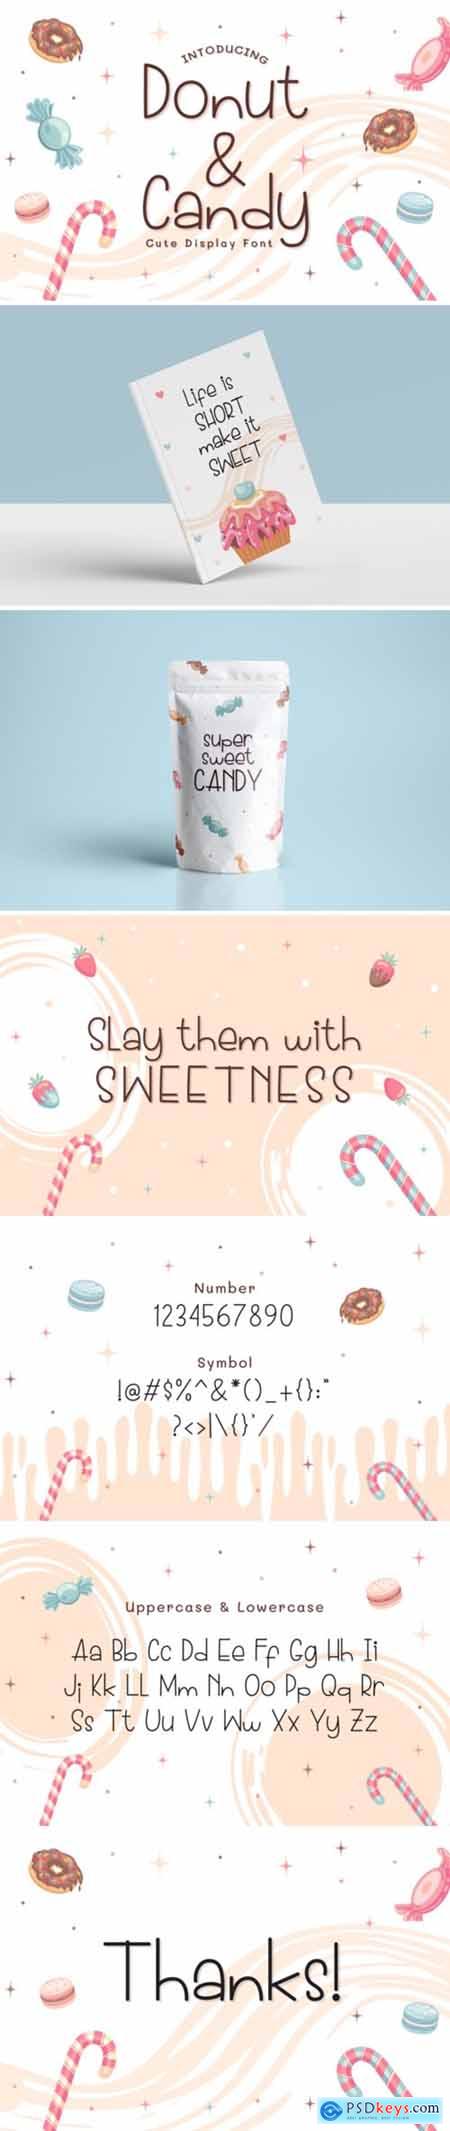 Donut & Candy Font